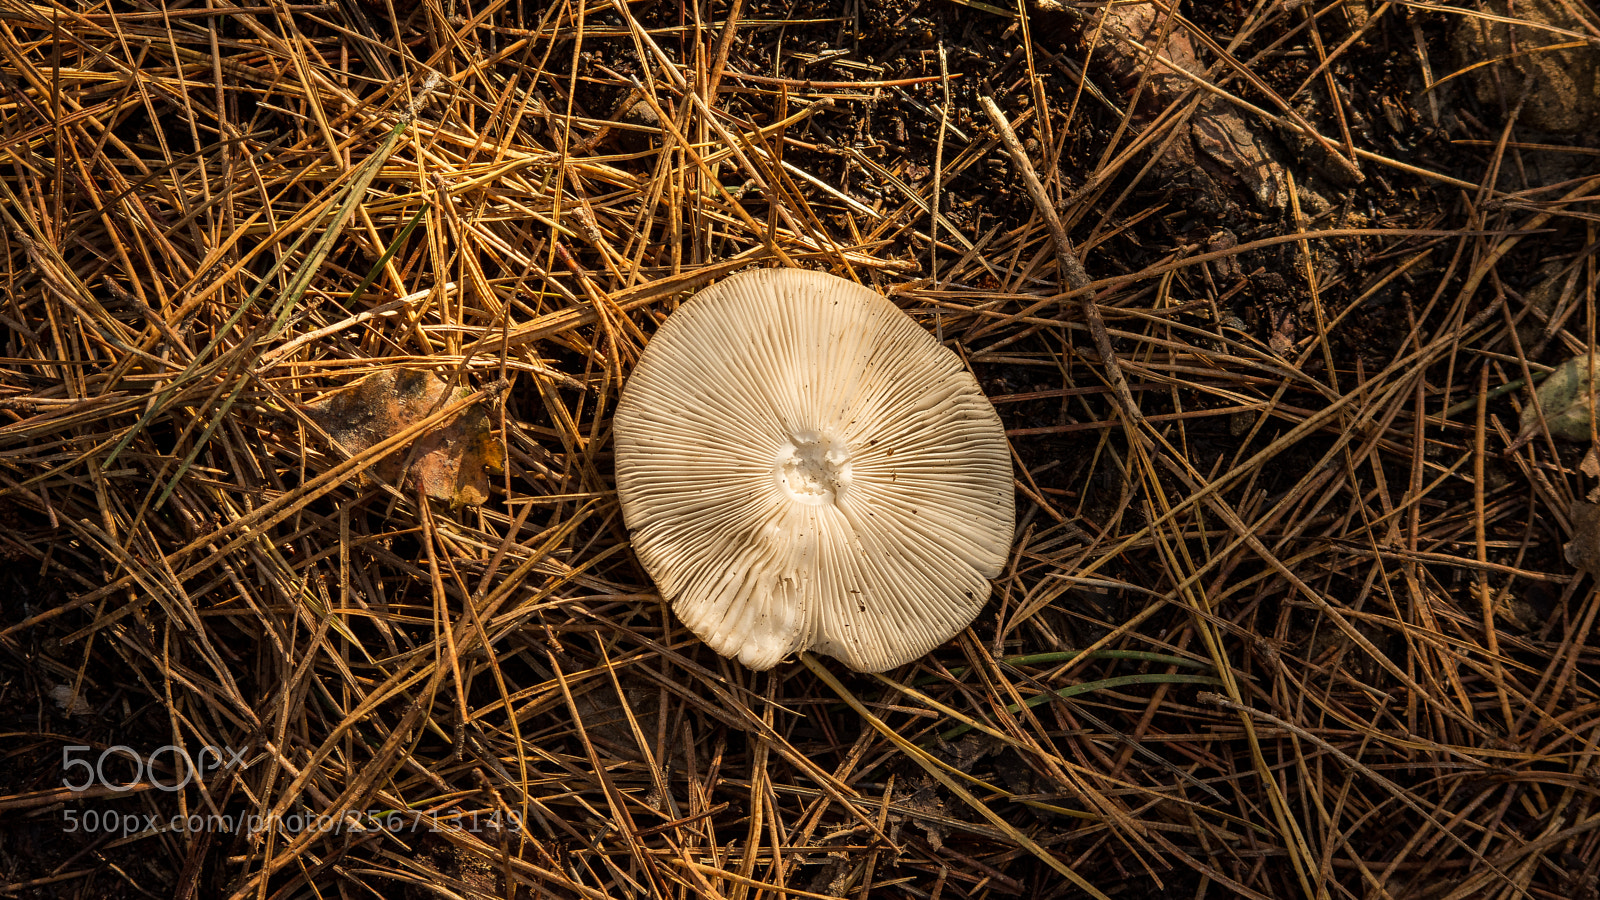 Nikon D7200 sample photo. Toadstool on forest floor photography